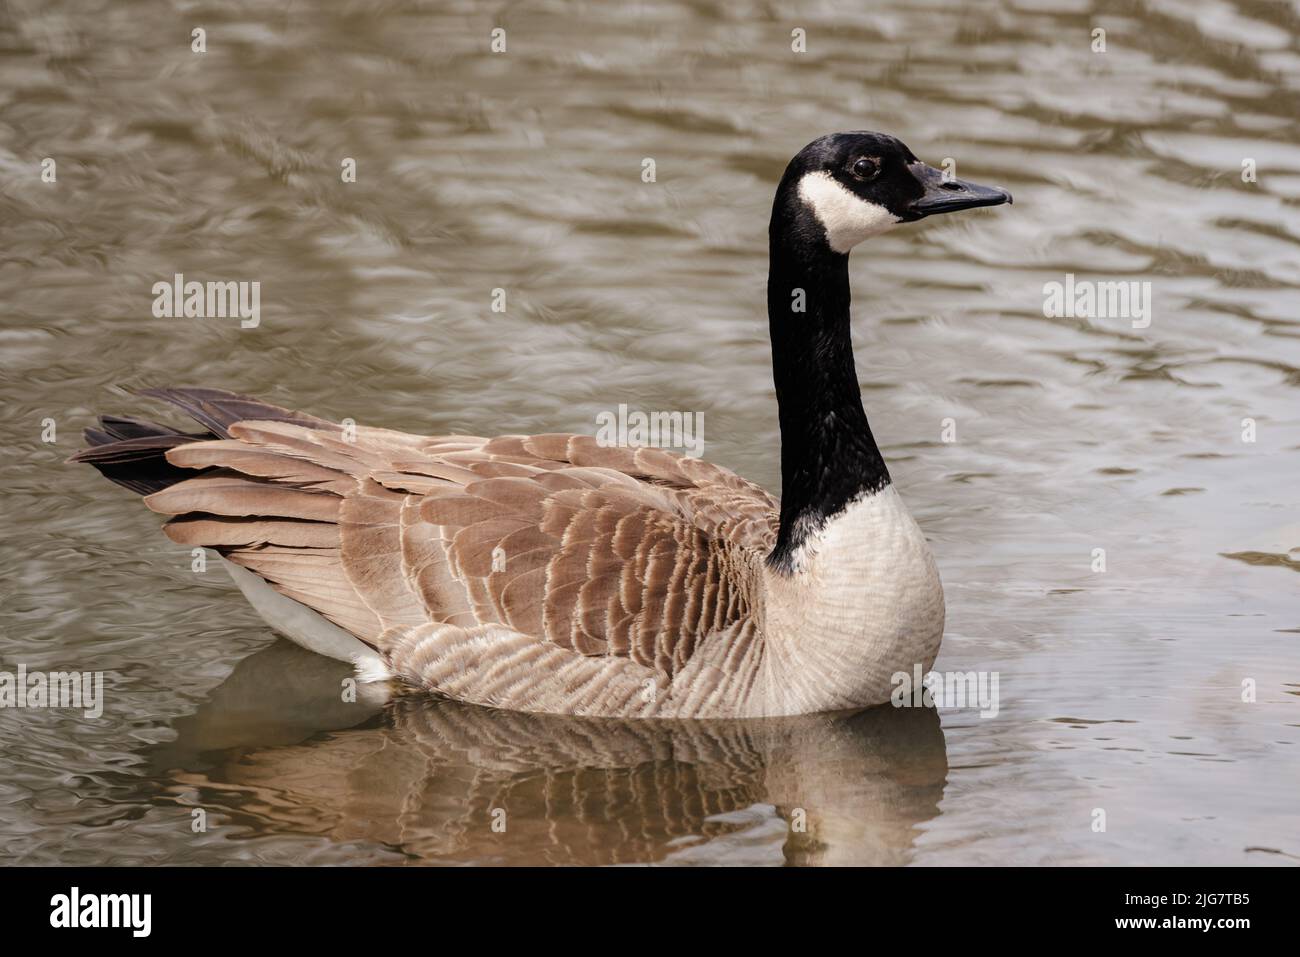 A closeup of a Canada goose (Branta canadensis)  swimming in a pond Stock Photo